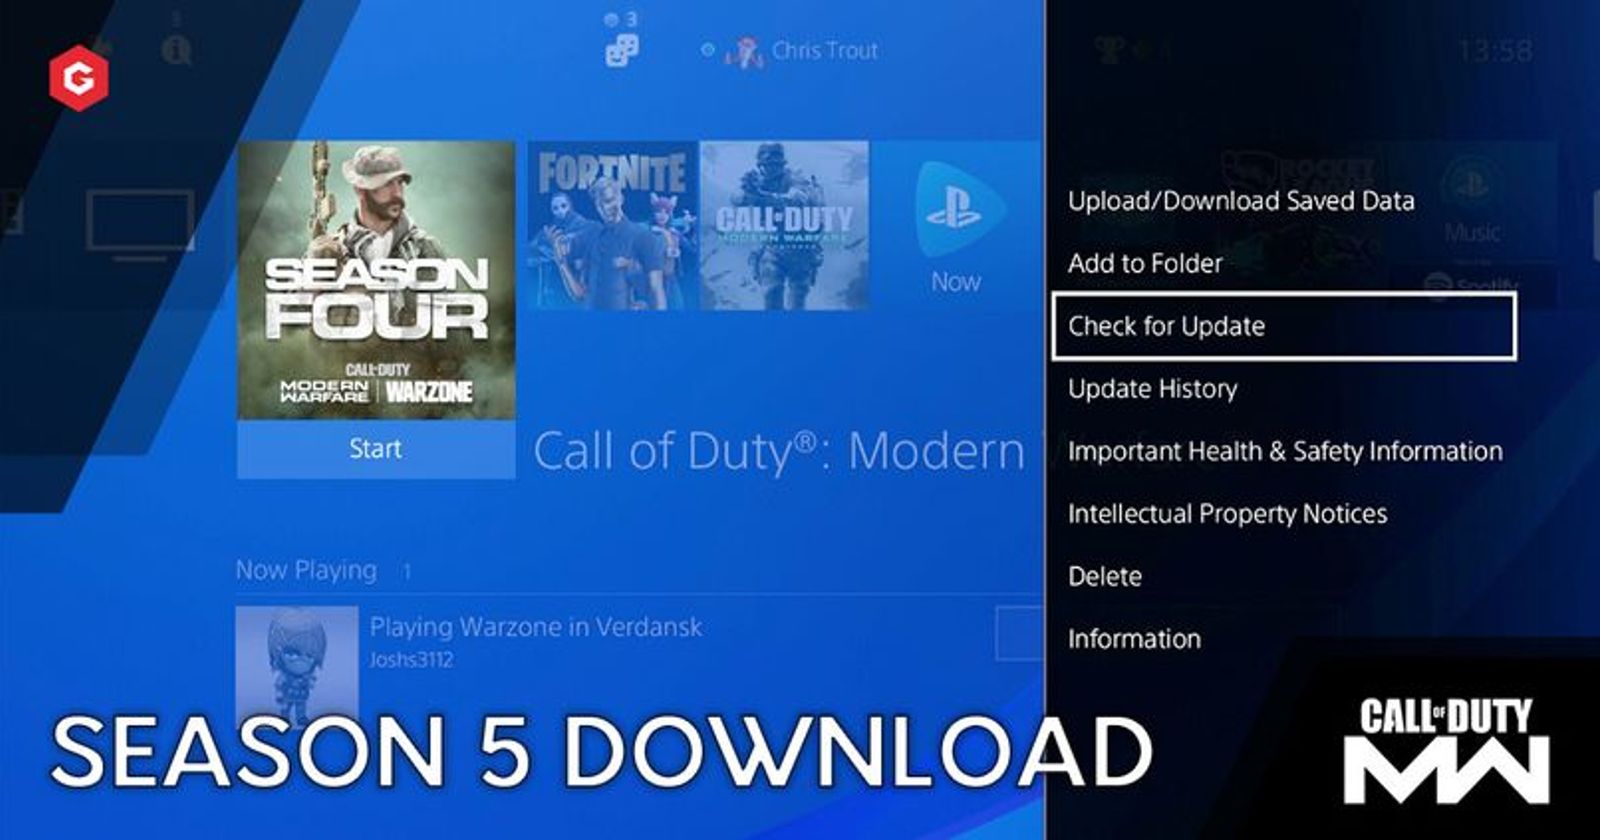 Battle.net Slow Downloads? Here's What to Do to Speed It Up for 'Call of  Duty: Warzone 2